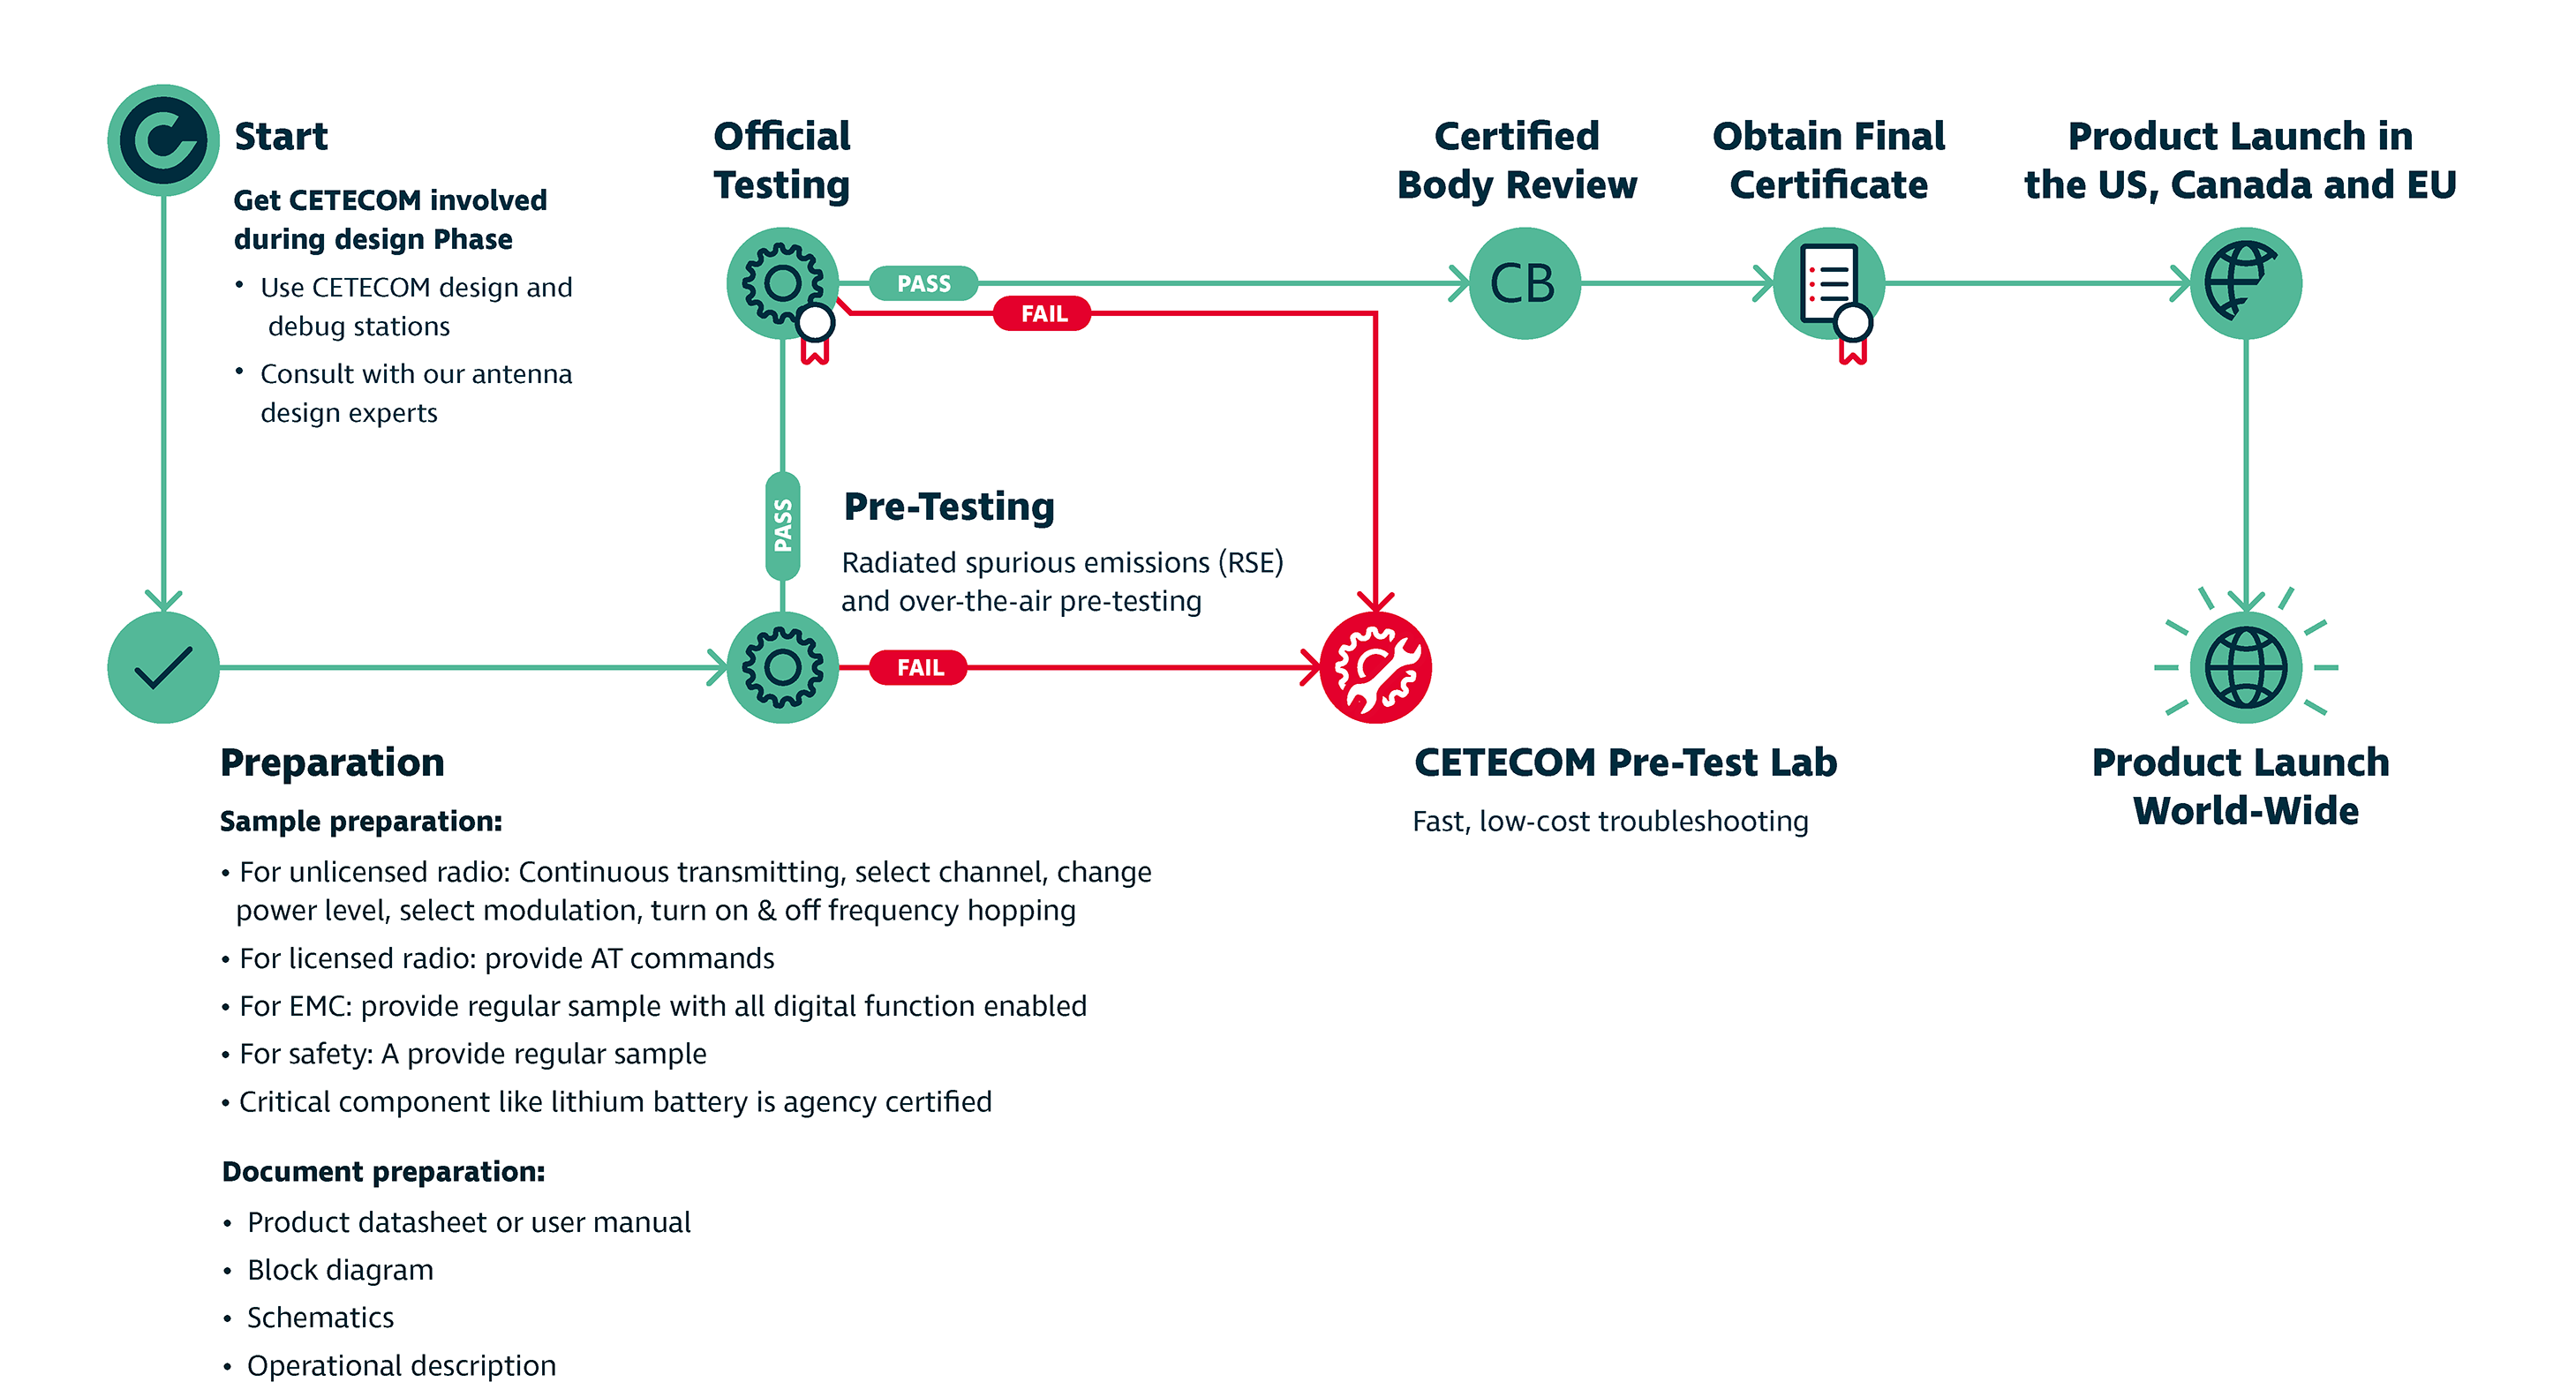 A flowchart showing the complete process for product development and certification with the help of CETECOM: Starting with the involvement of CETECOM in the design phase, moving on to sample preparation, then to pre-testing, official testing, certified body review, obtaining the final certificate, product launch in the USA, Canada and the EU and finally product launch worldwide.